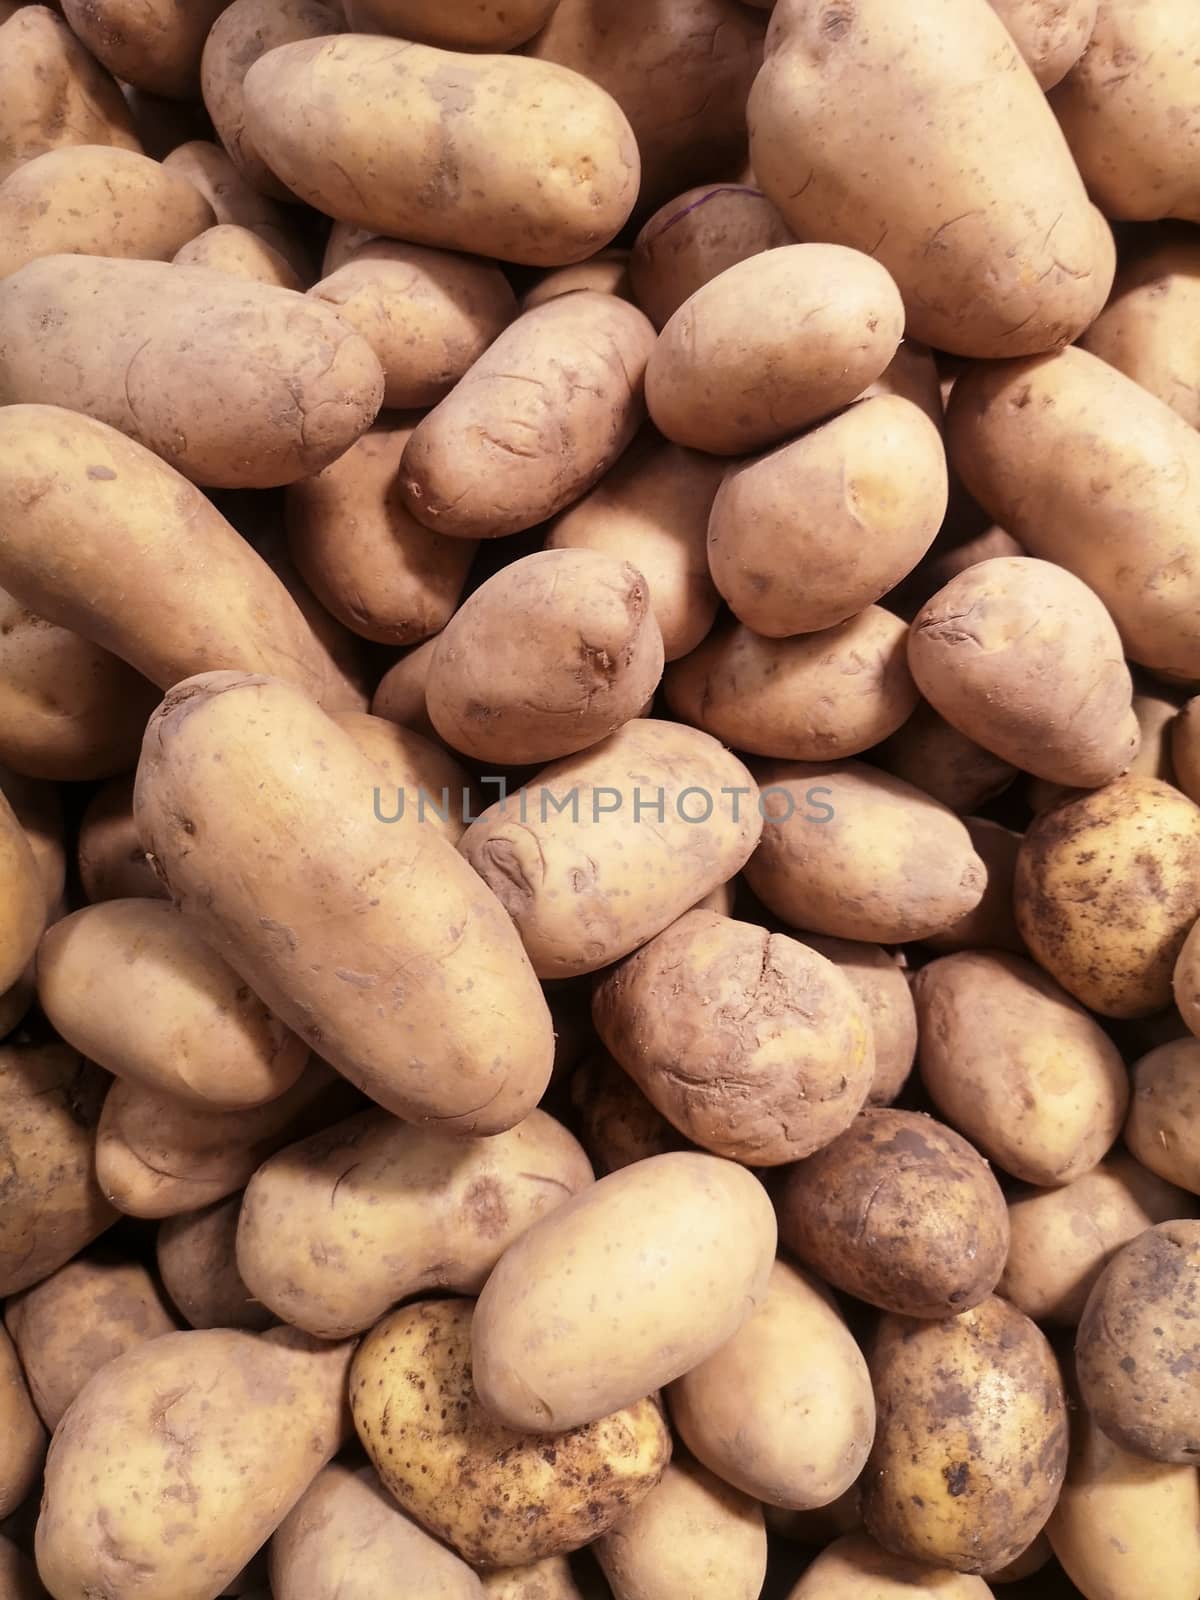 Unwashed potatoes in a supermarket on a store counter for sale.